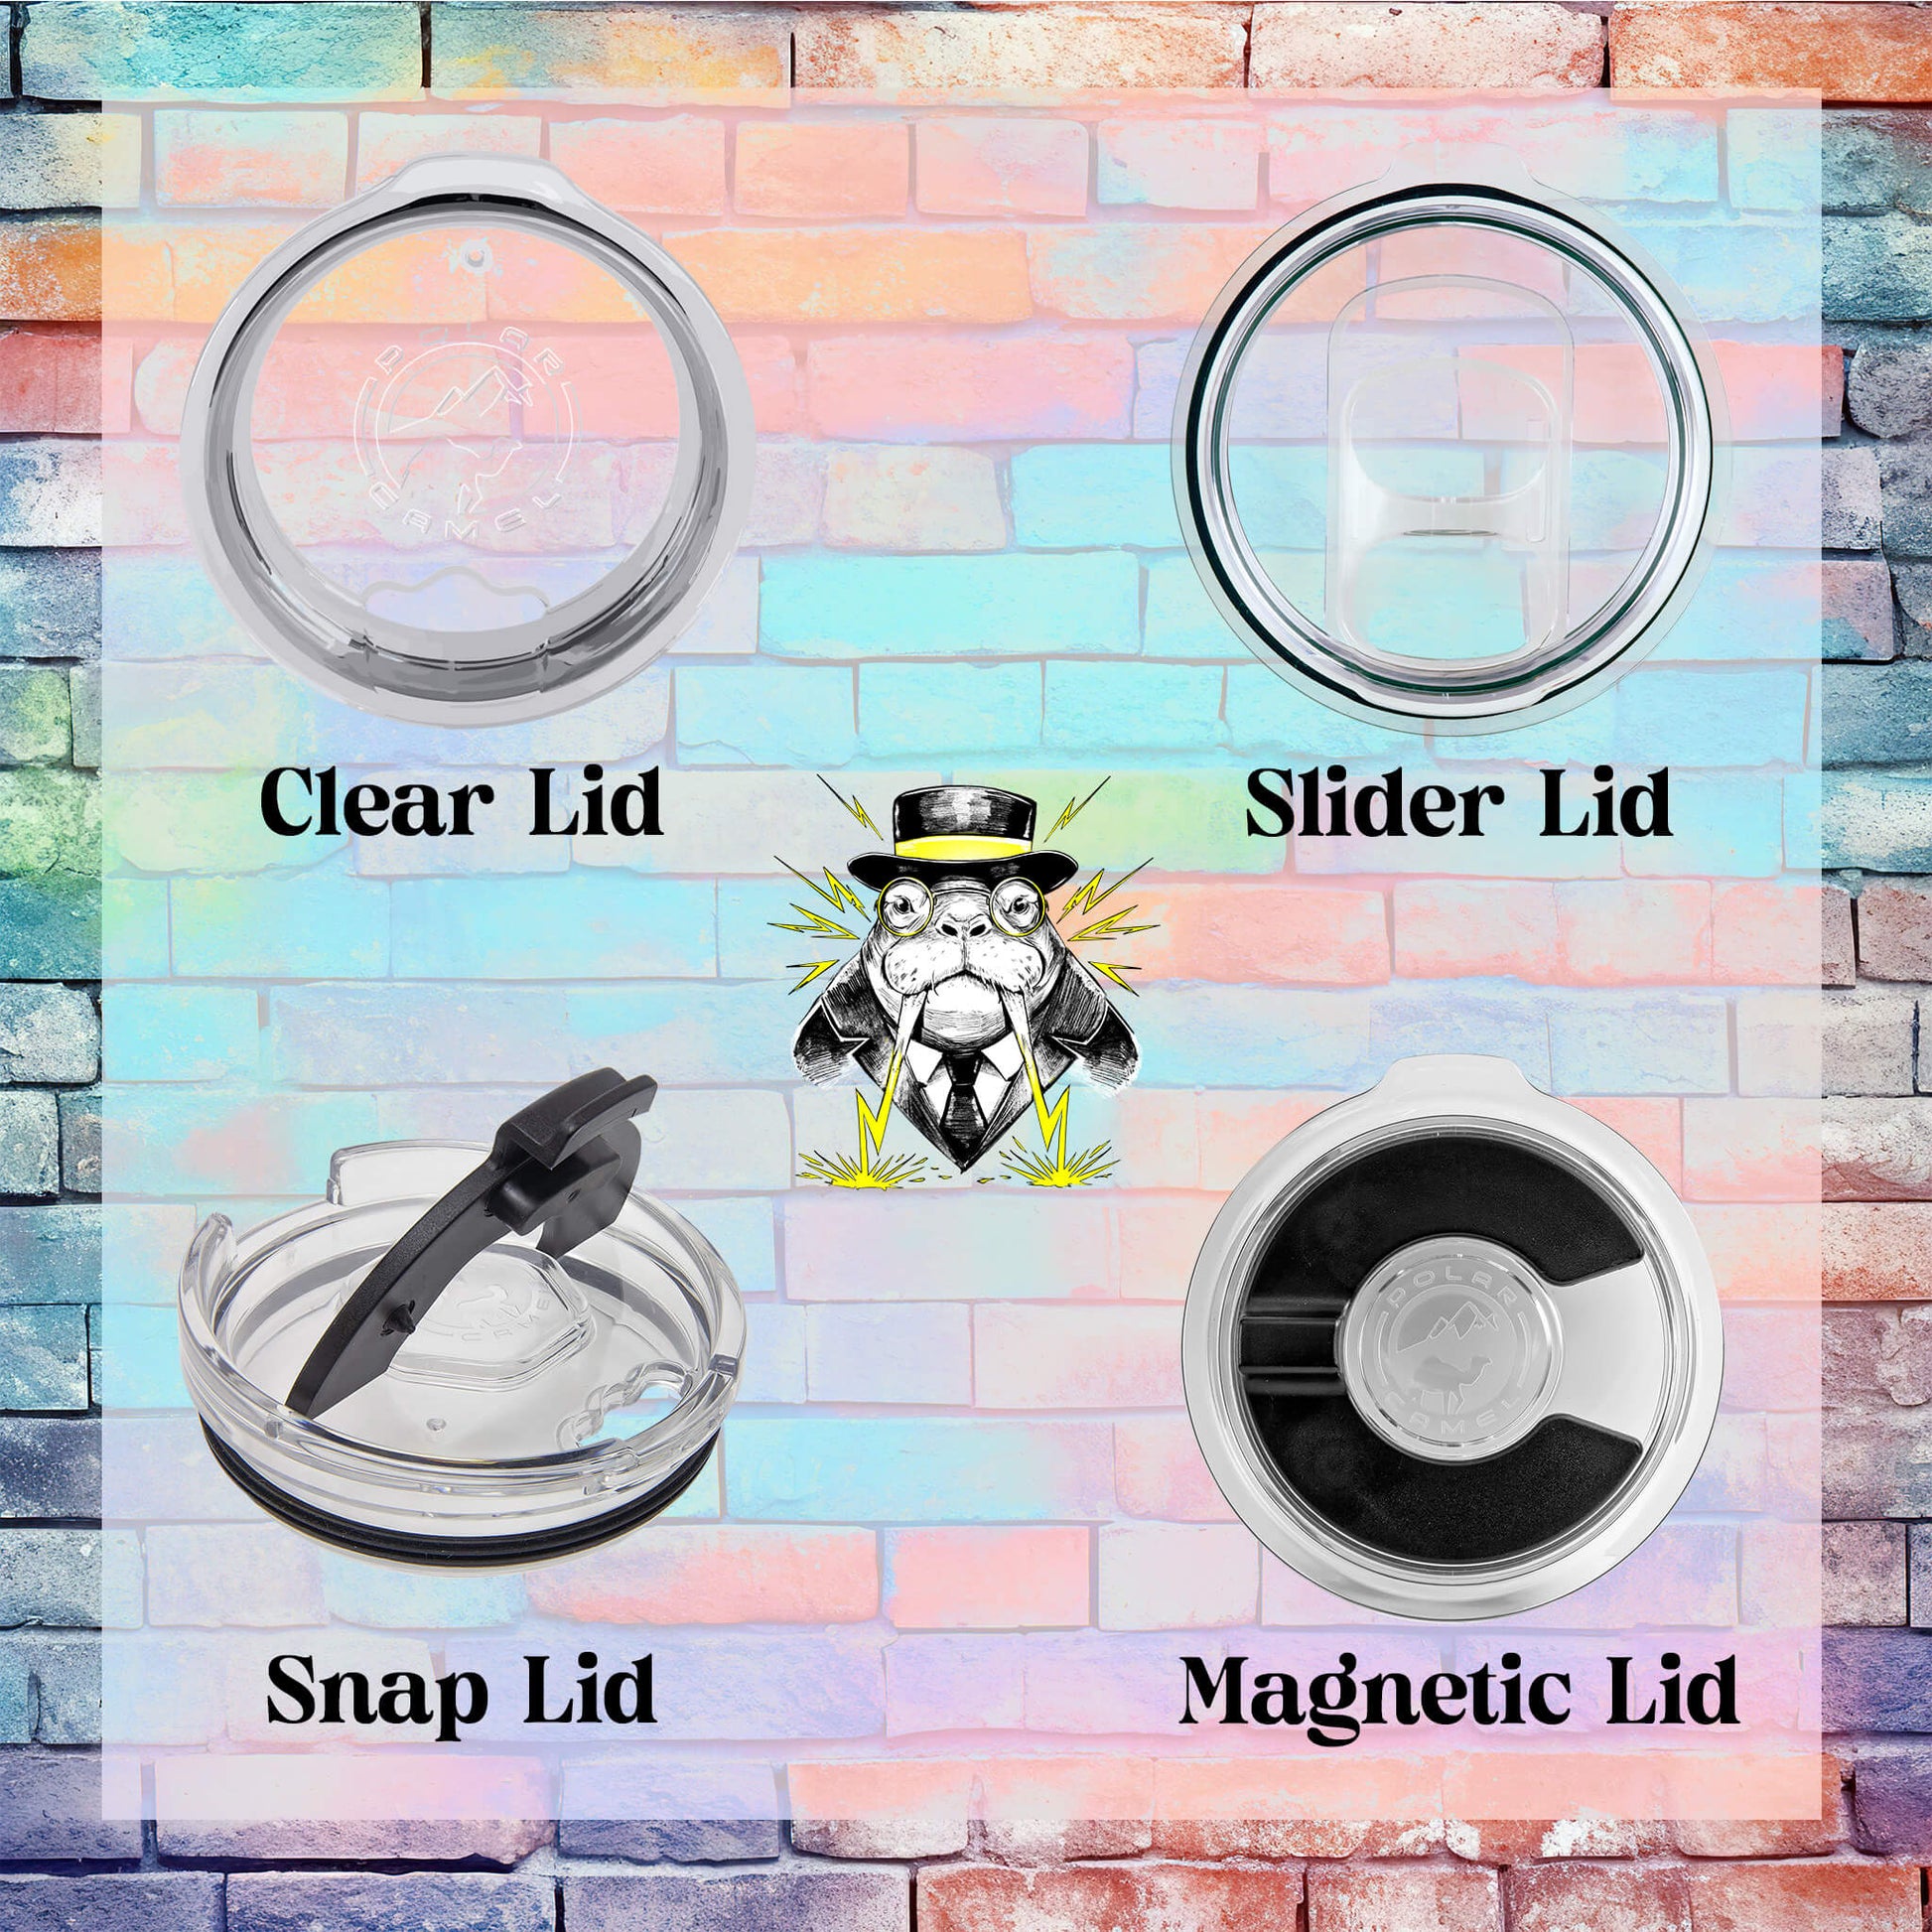 Lid Options: Clear, Slider, Snap, and Magnetic.